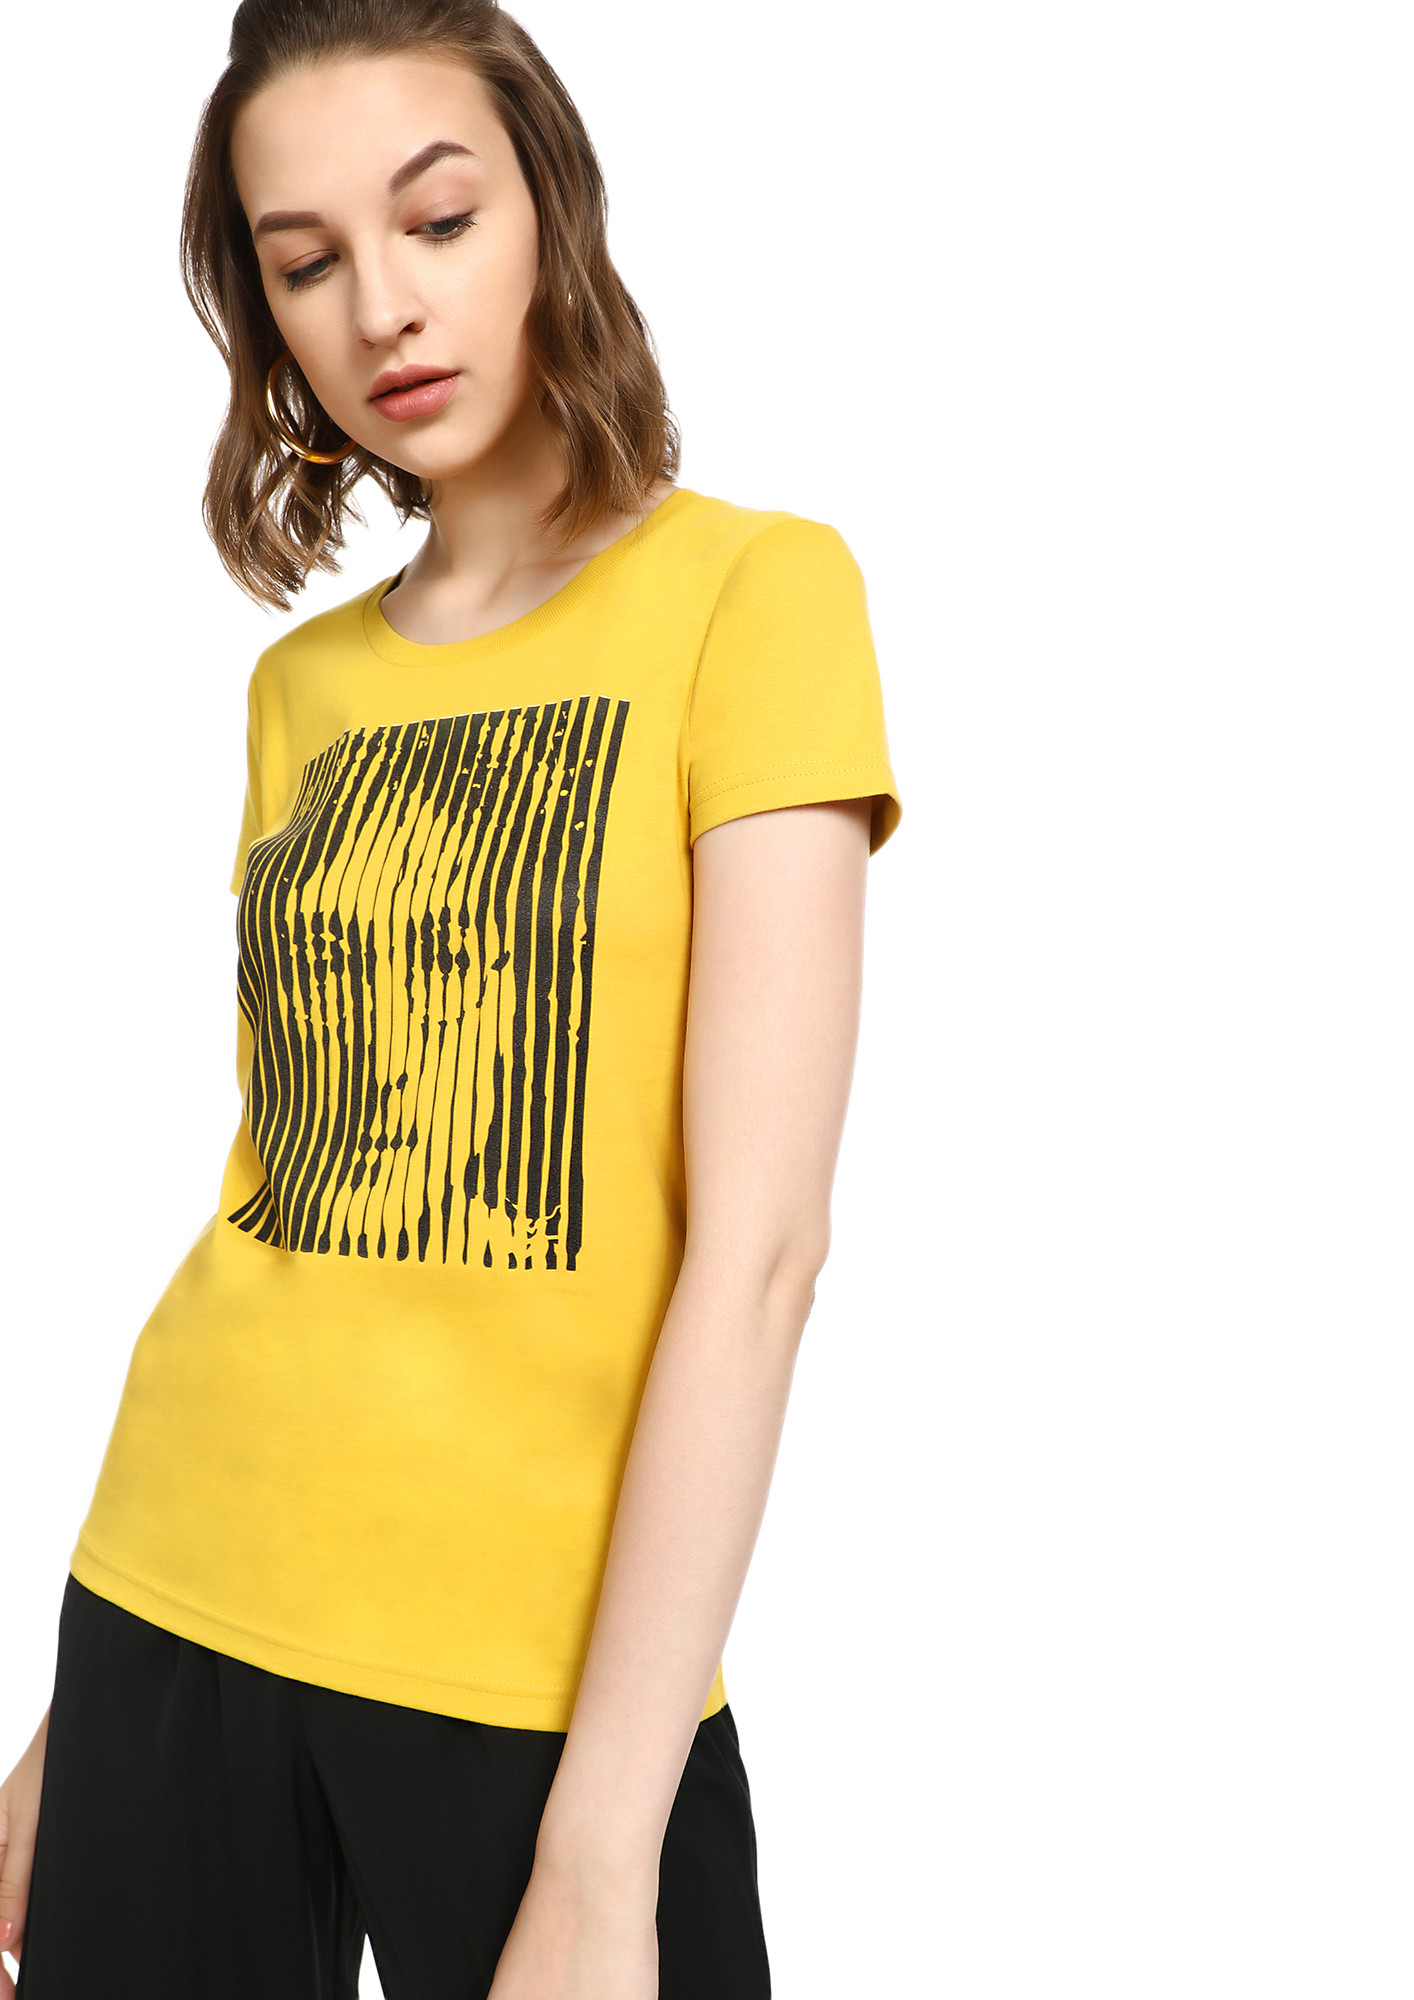 MAD FAT MONKEY FAN FOREVER YELLOW T-SHIRT